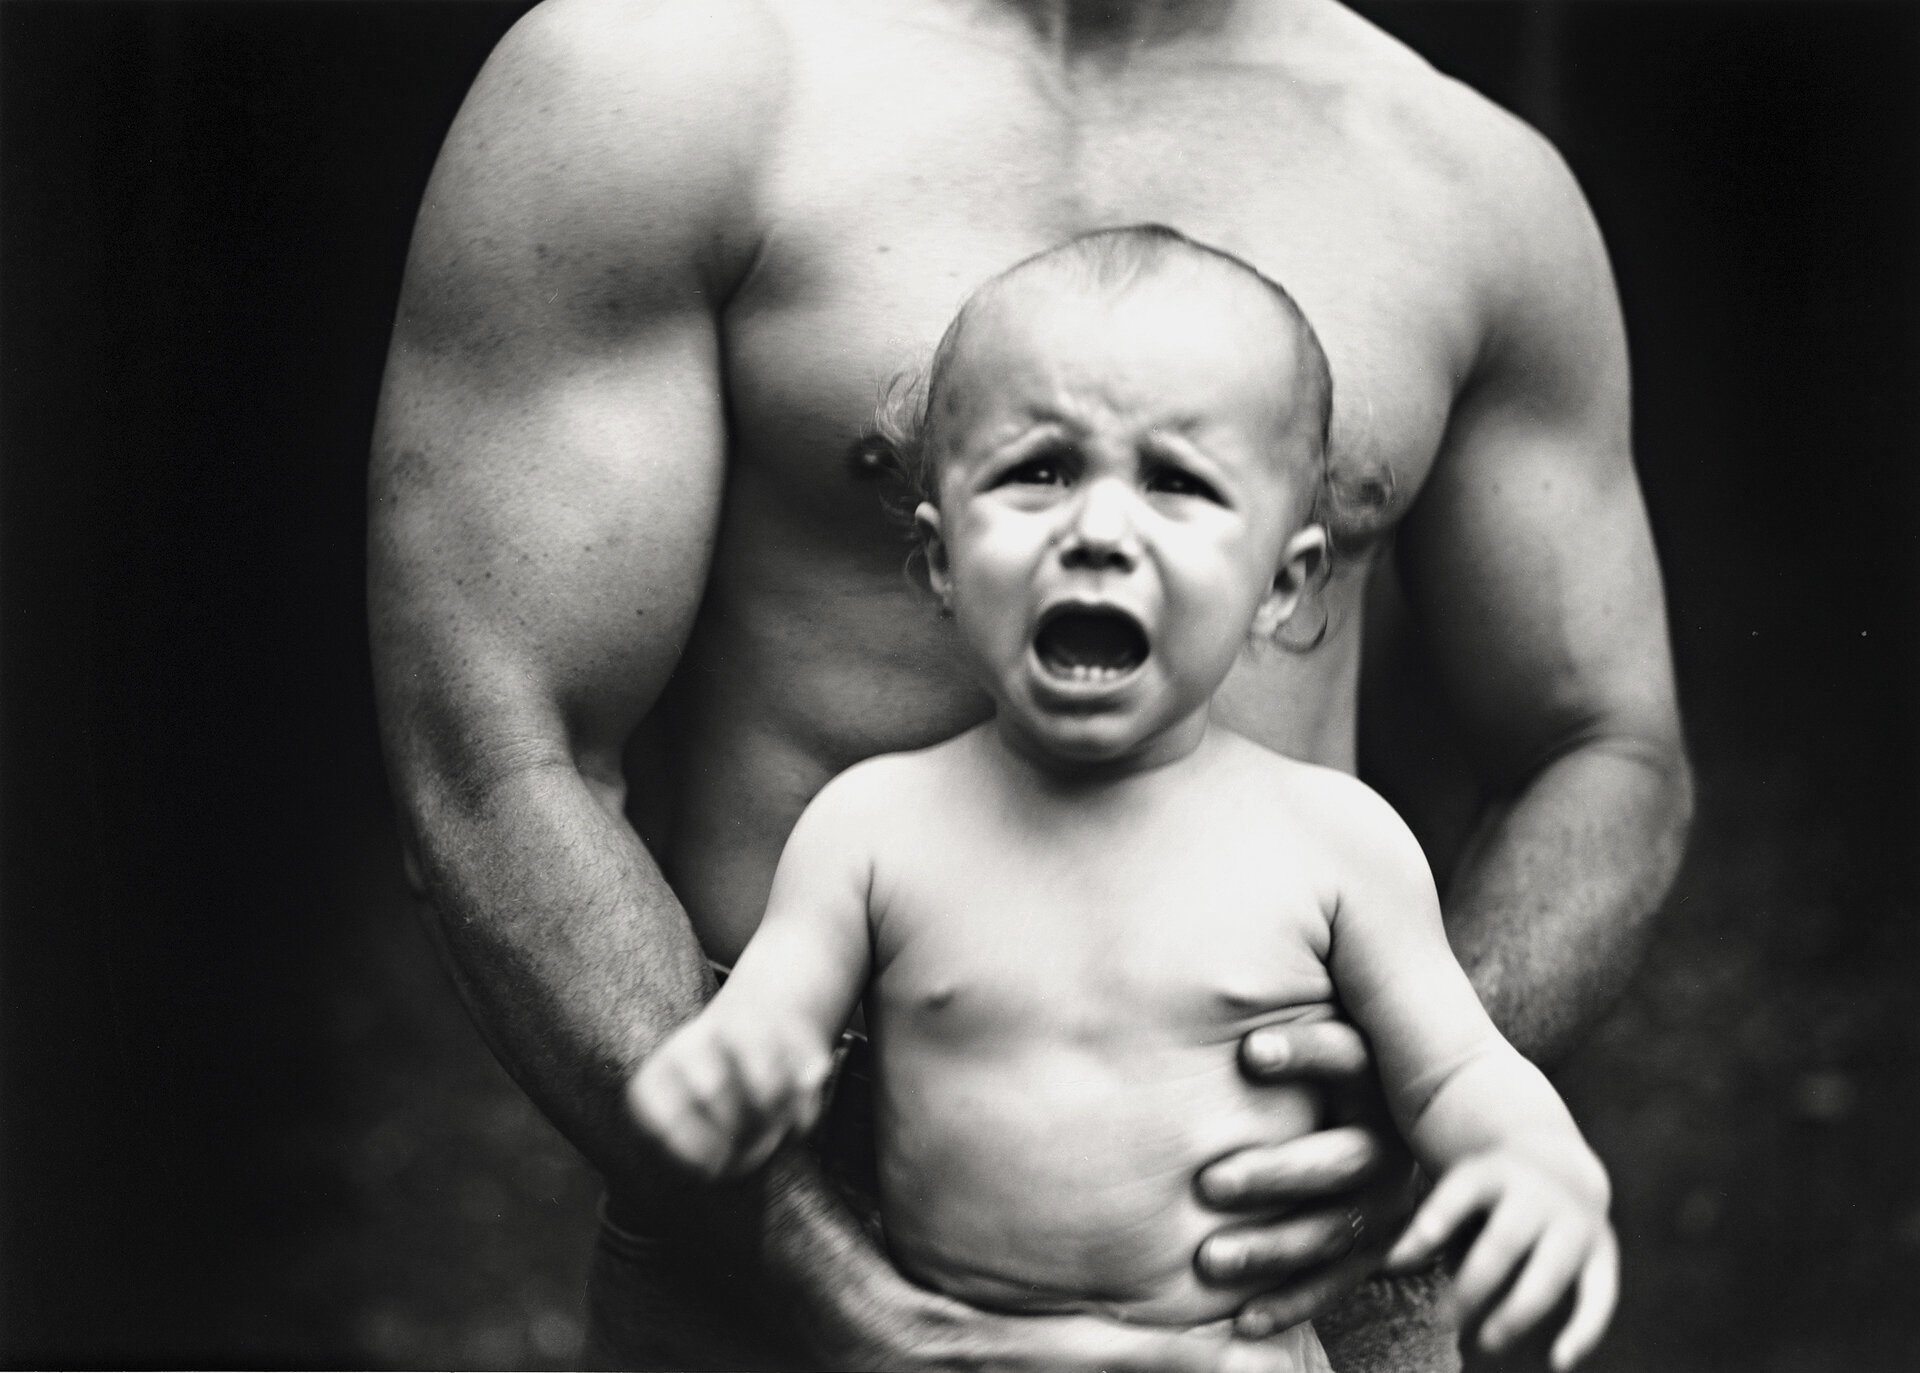  NEW FATHER, 2001  GELATIN SILVER PHOTOGRAPH 